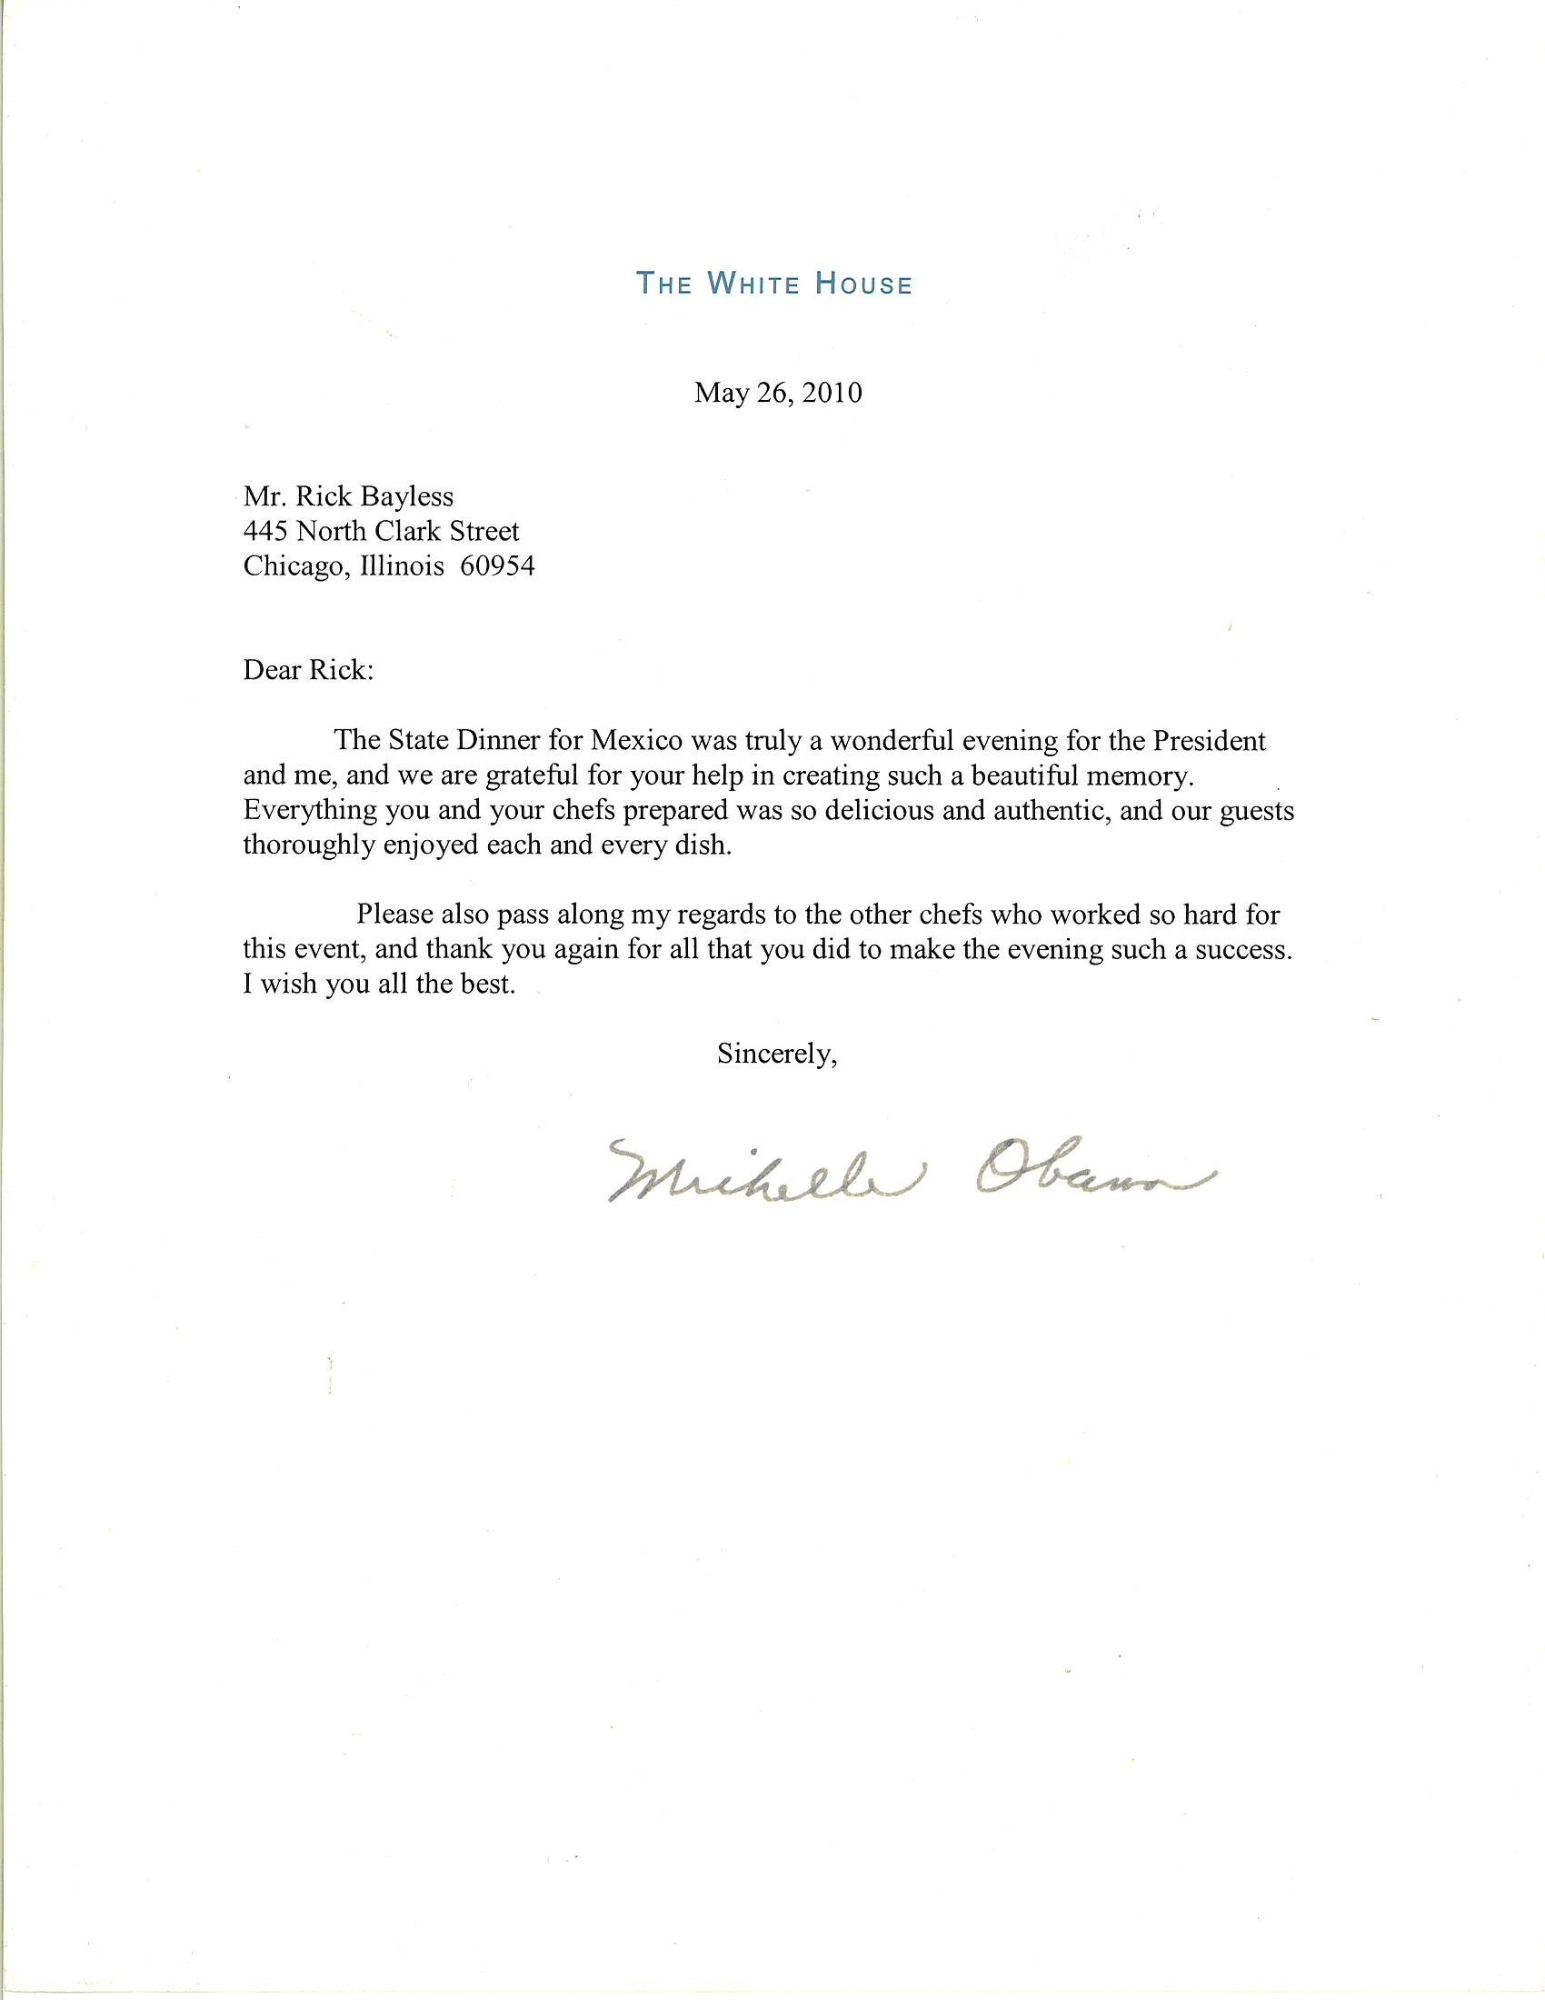 A 2010 Letter from Michelle Obama